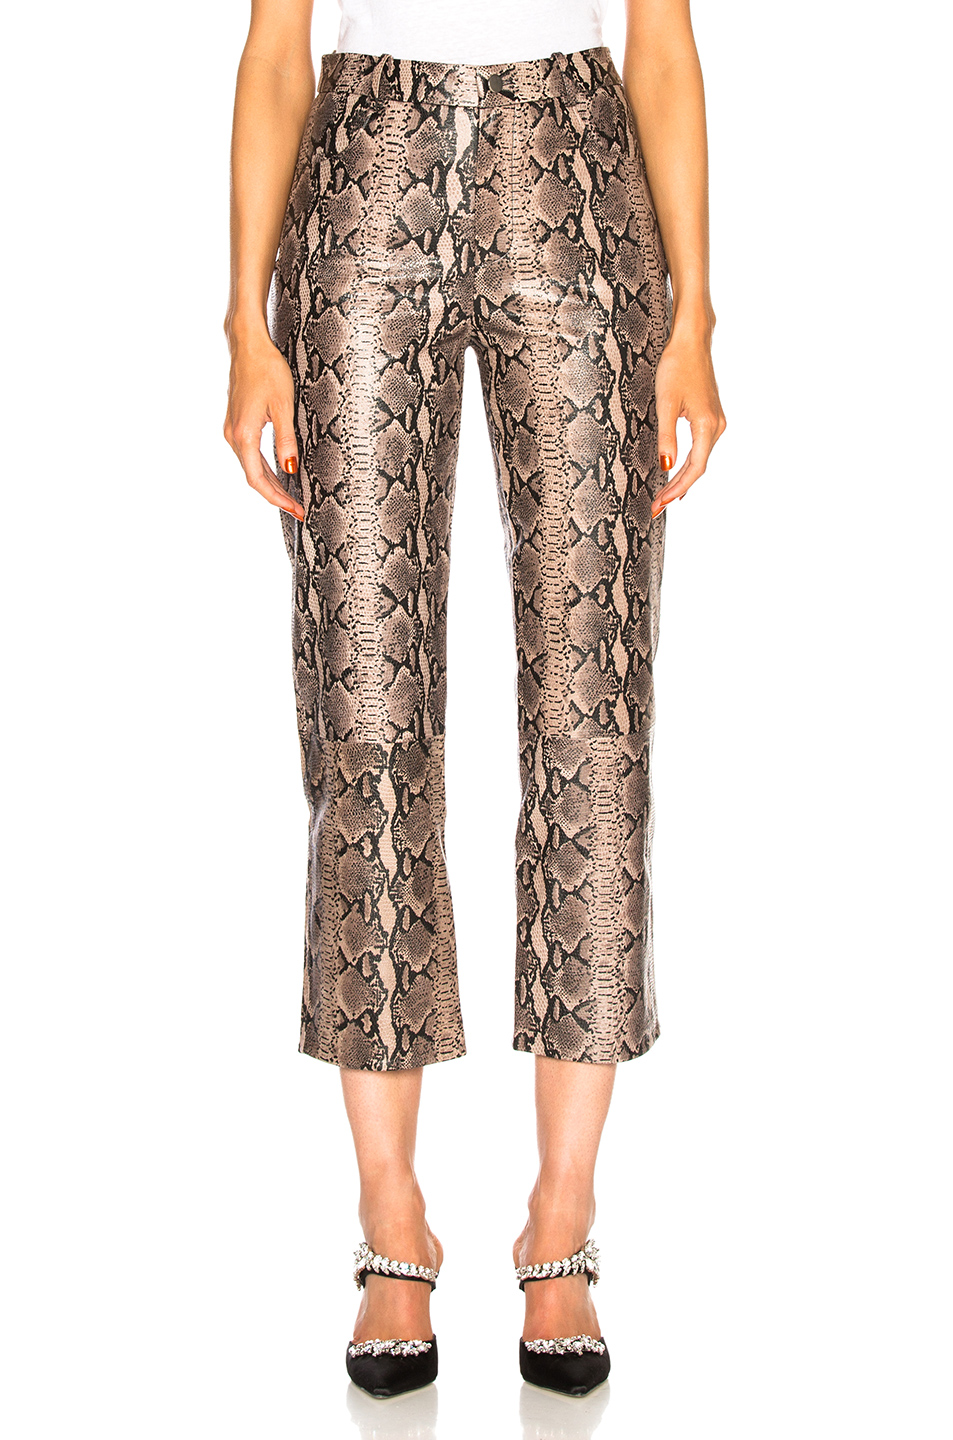 We're Calling It: Snakeskin Print Is the New Cheetah Print - theFashionSpot